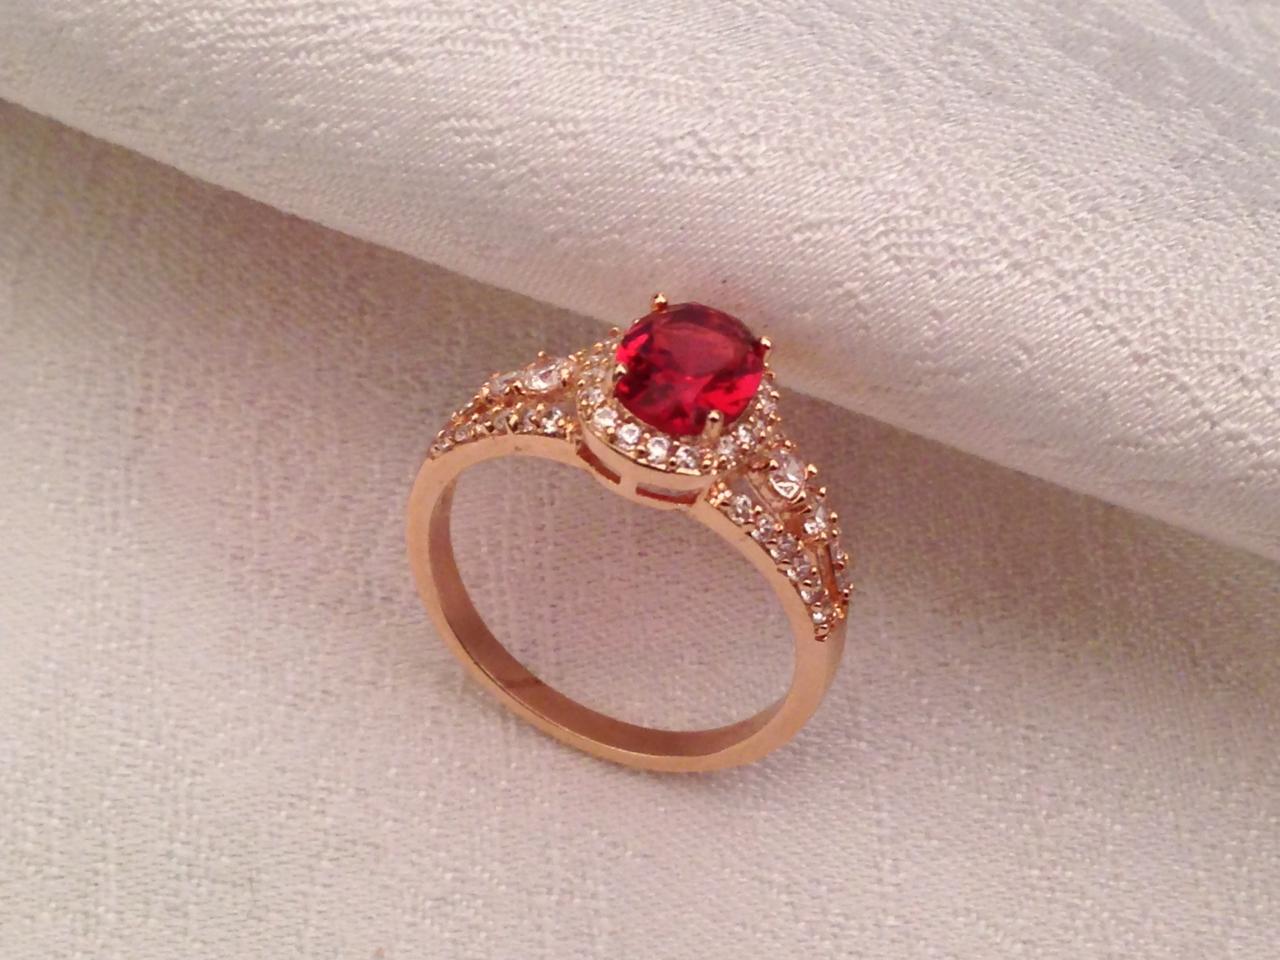 Bling Rose Gold Ring With Oval Red Quartz Stone